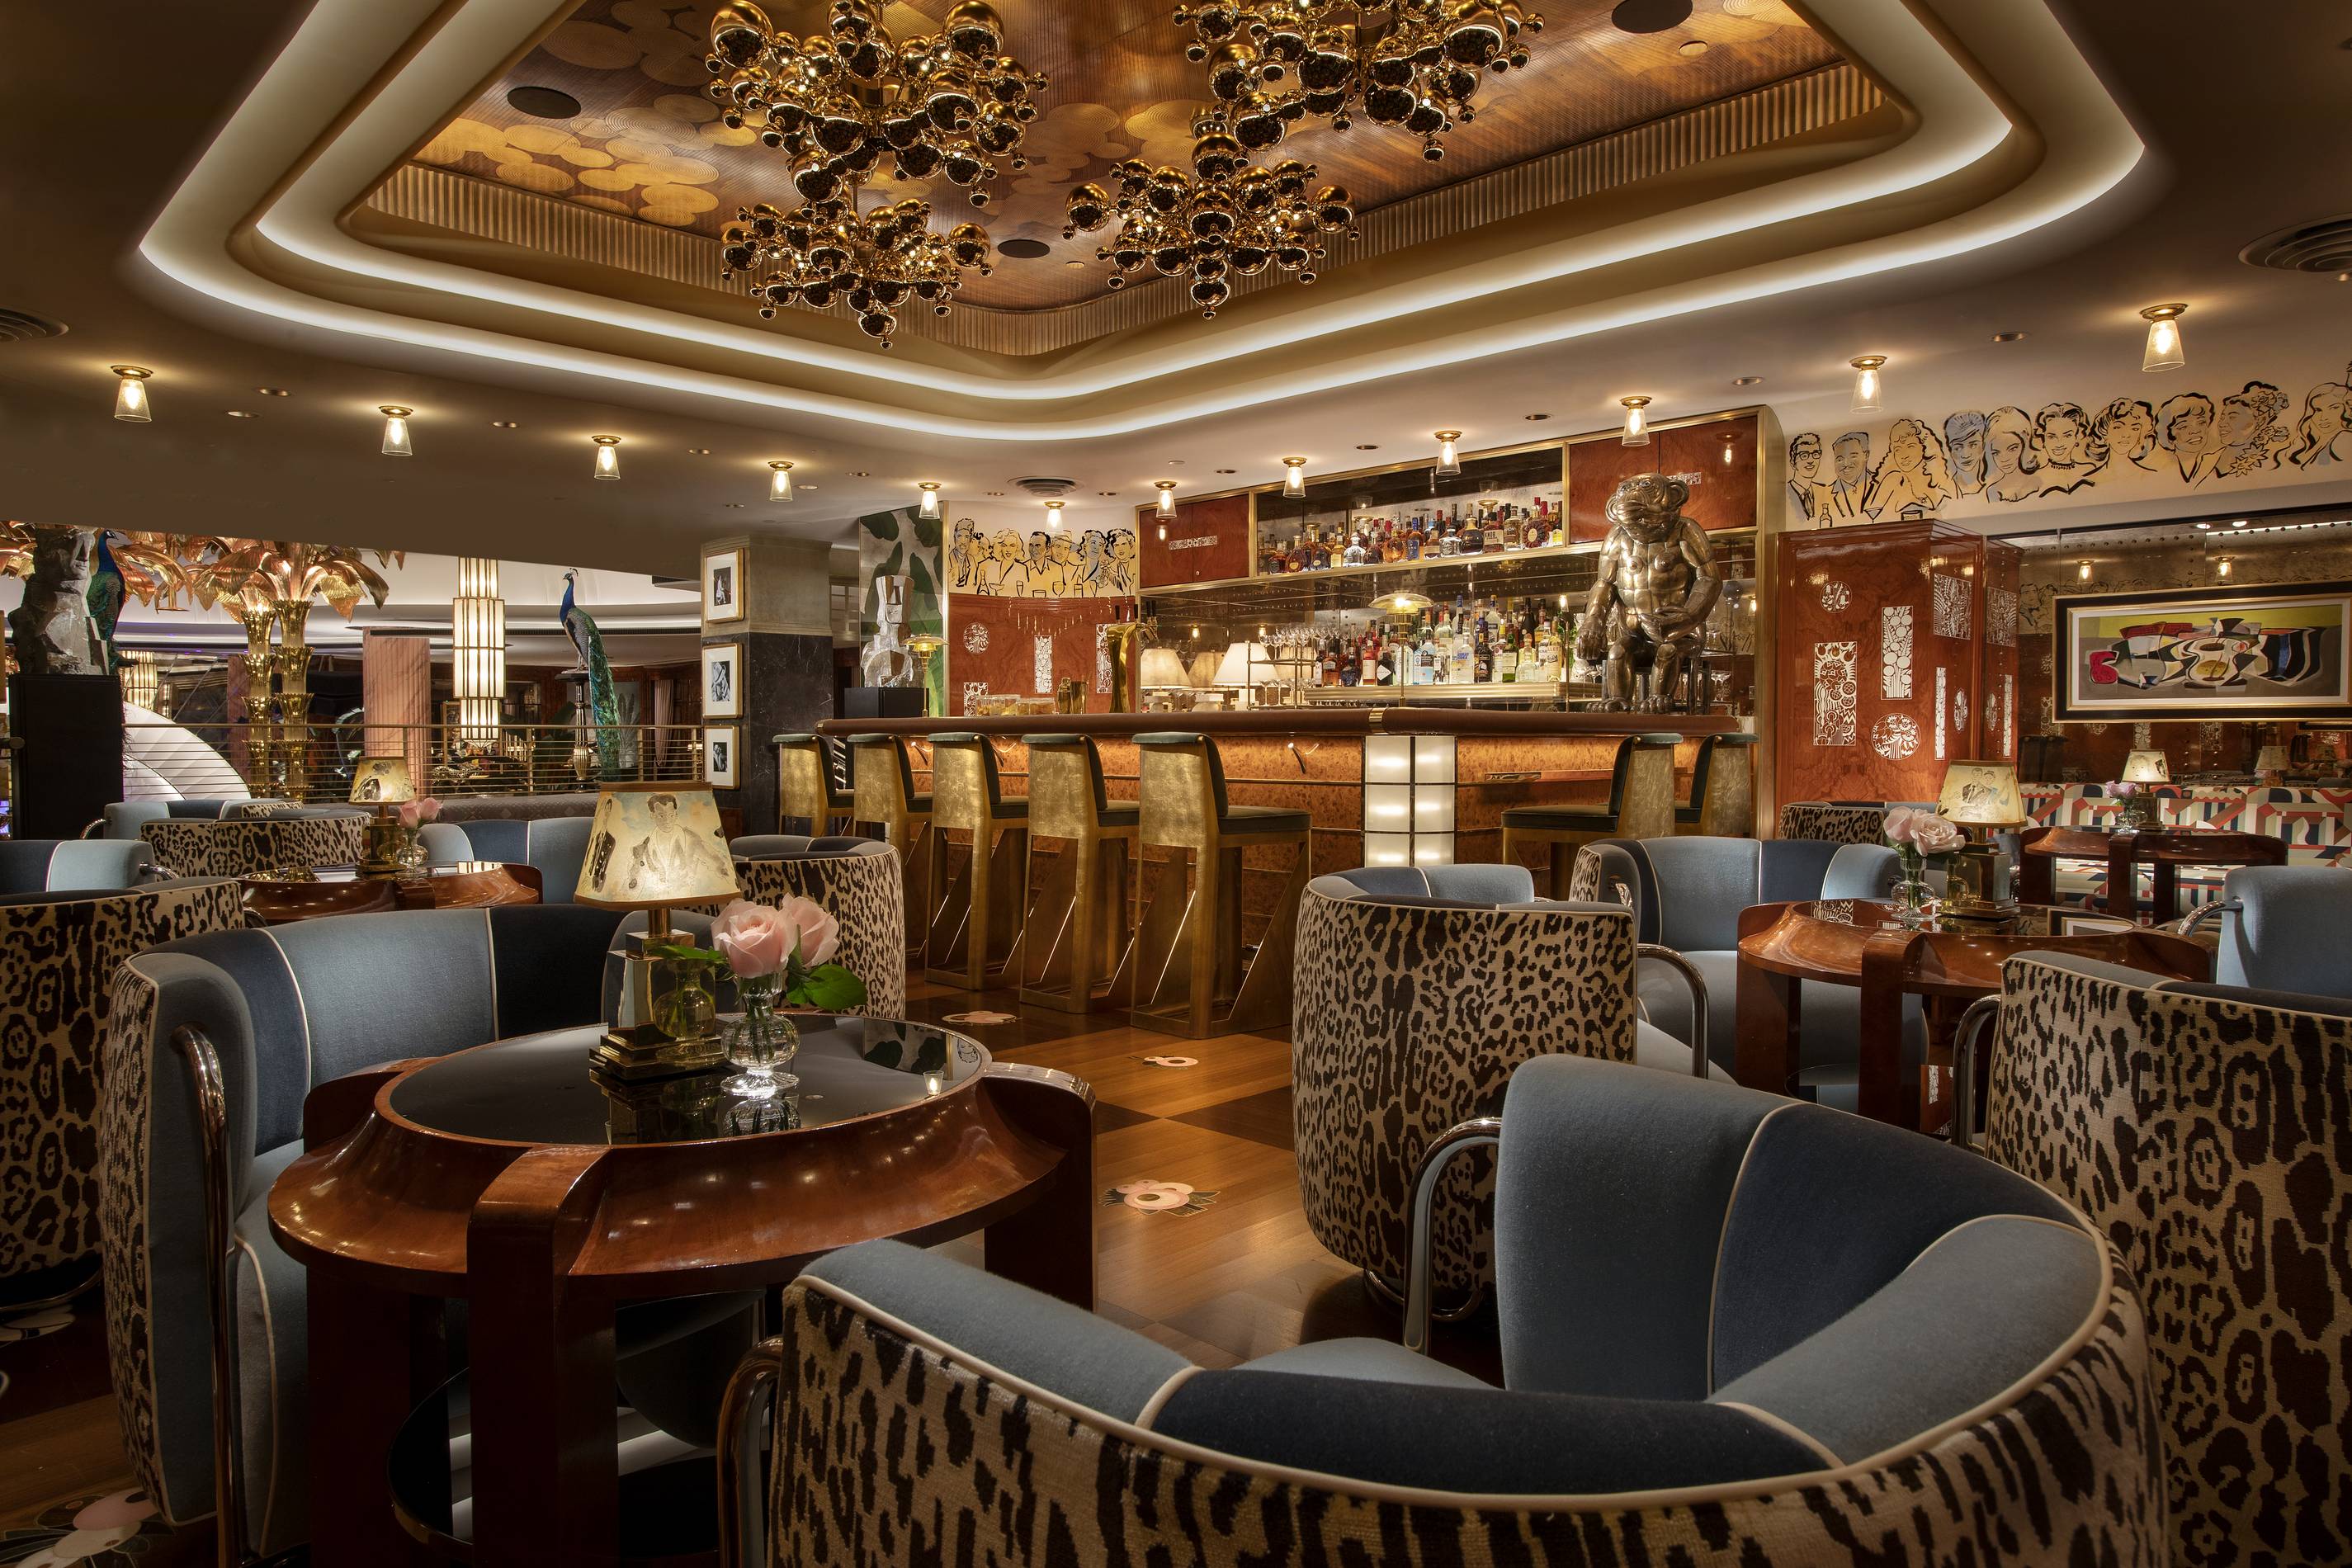 The Wynn S Delilah Is A Glamorous Dining Experience Inspired By Vegas Past